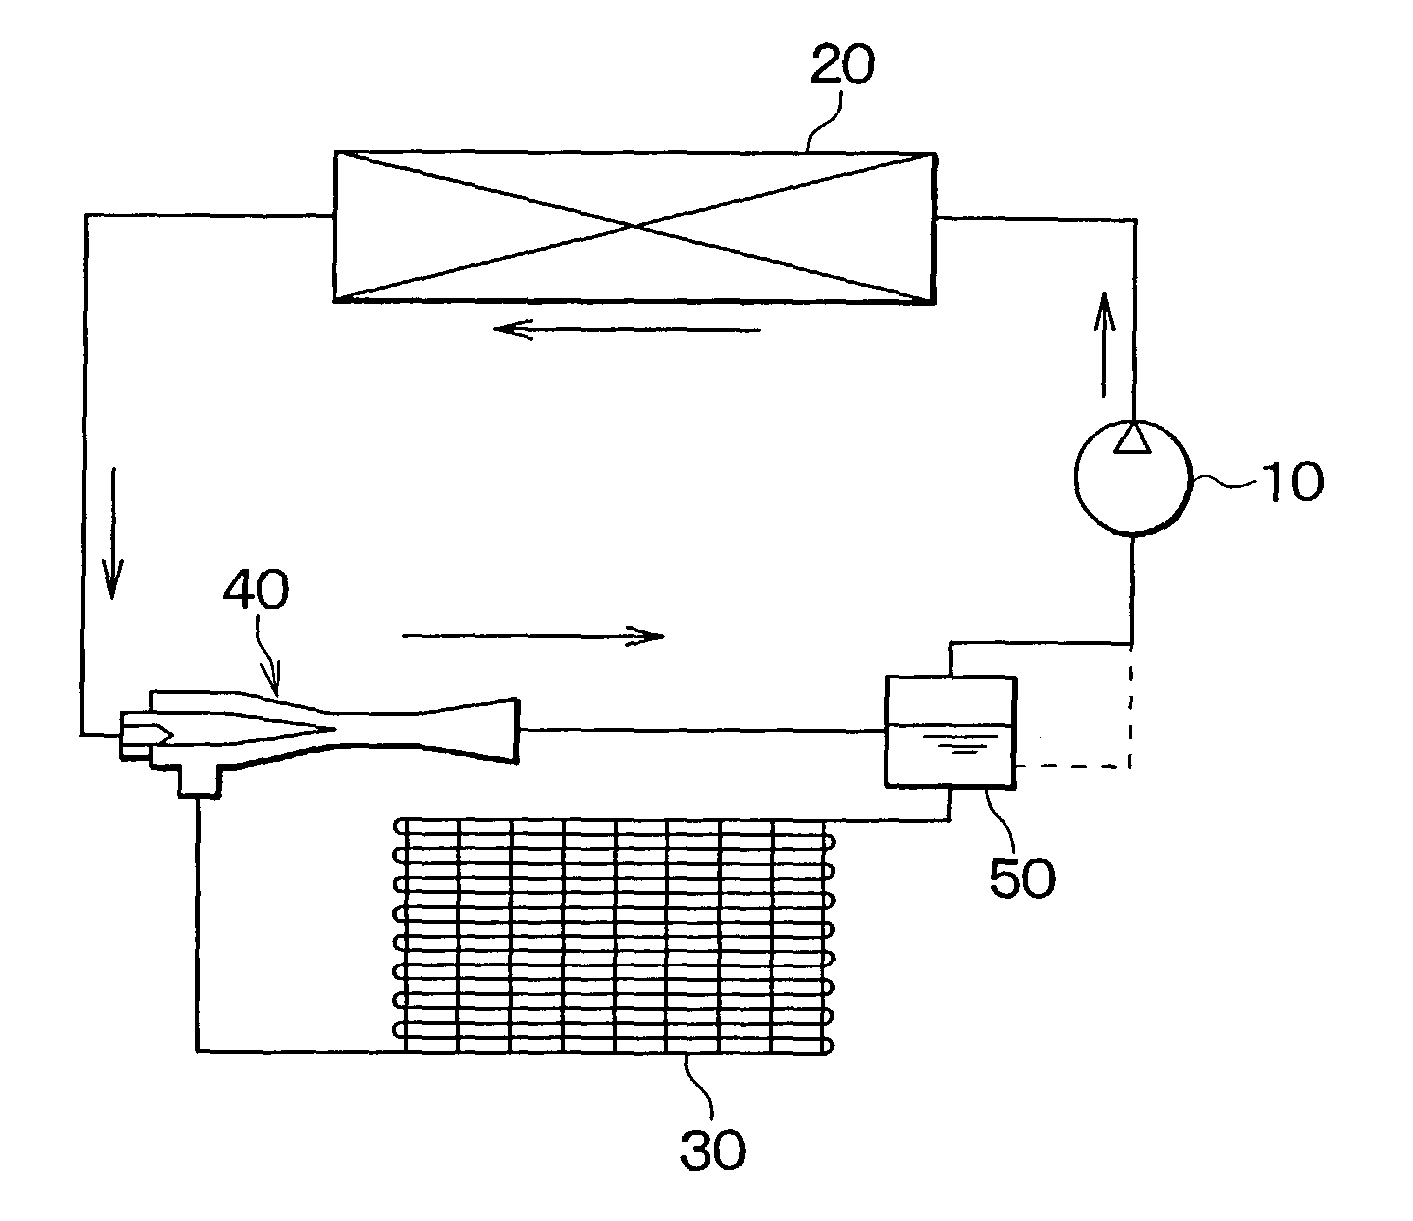 Ejector decompression device with throttle controllable nozzle